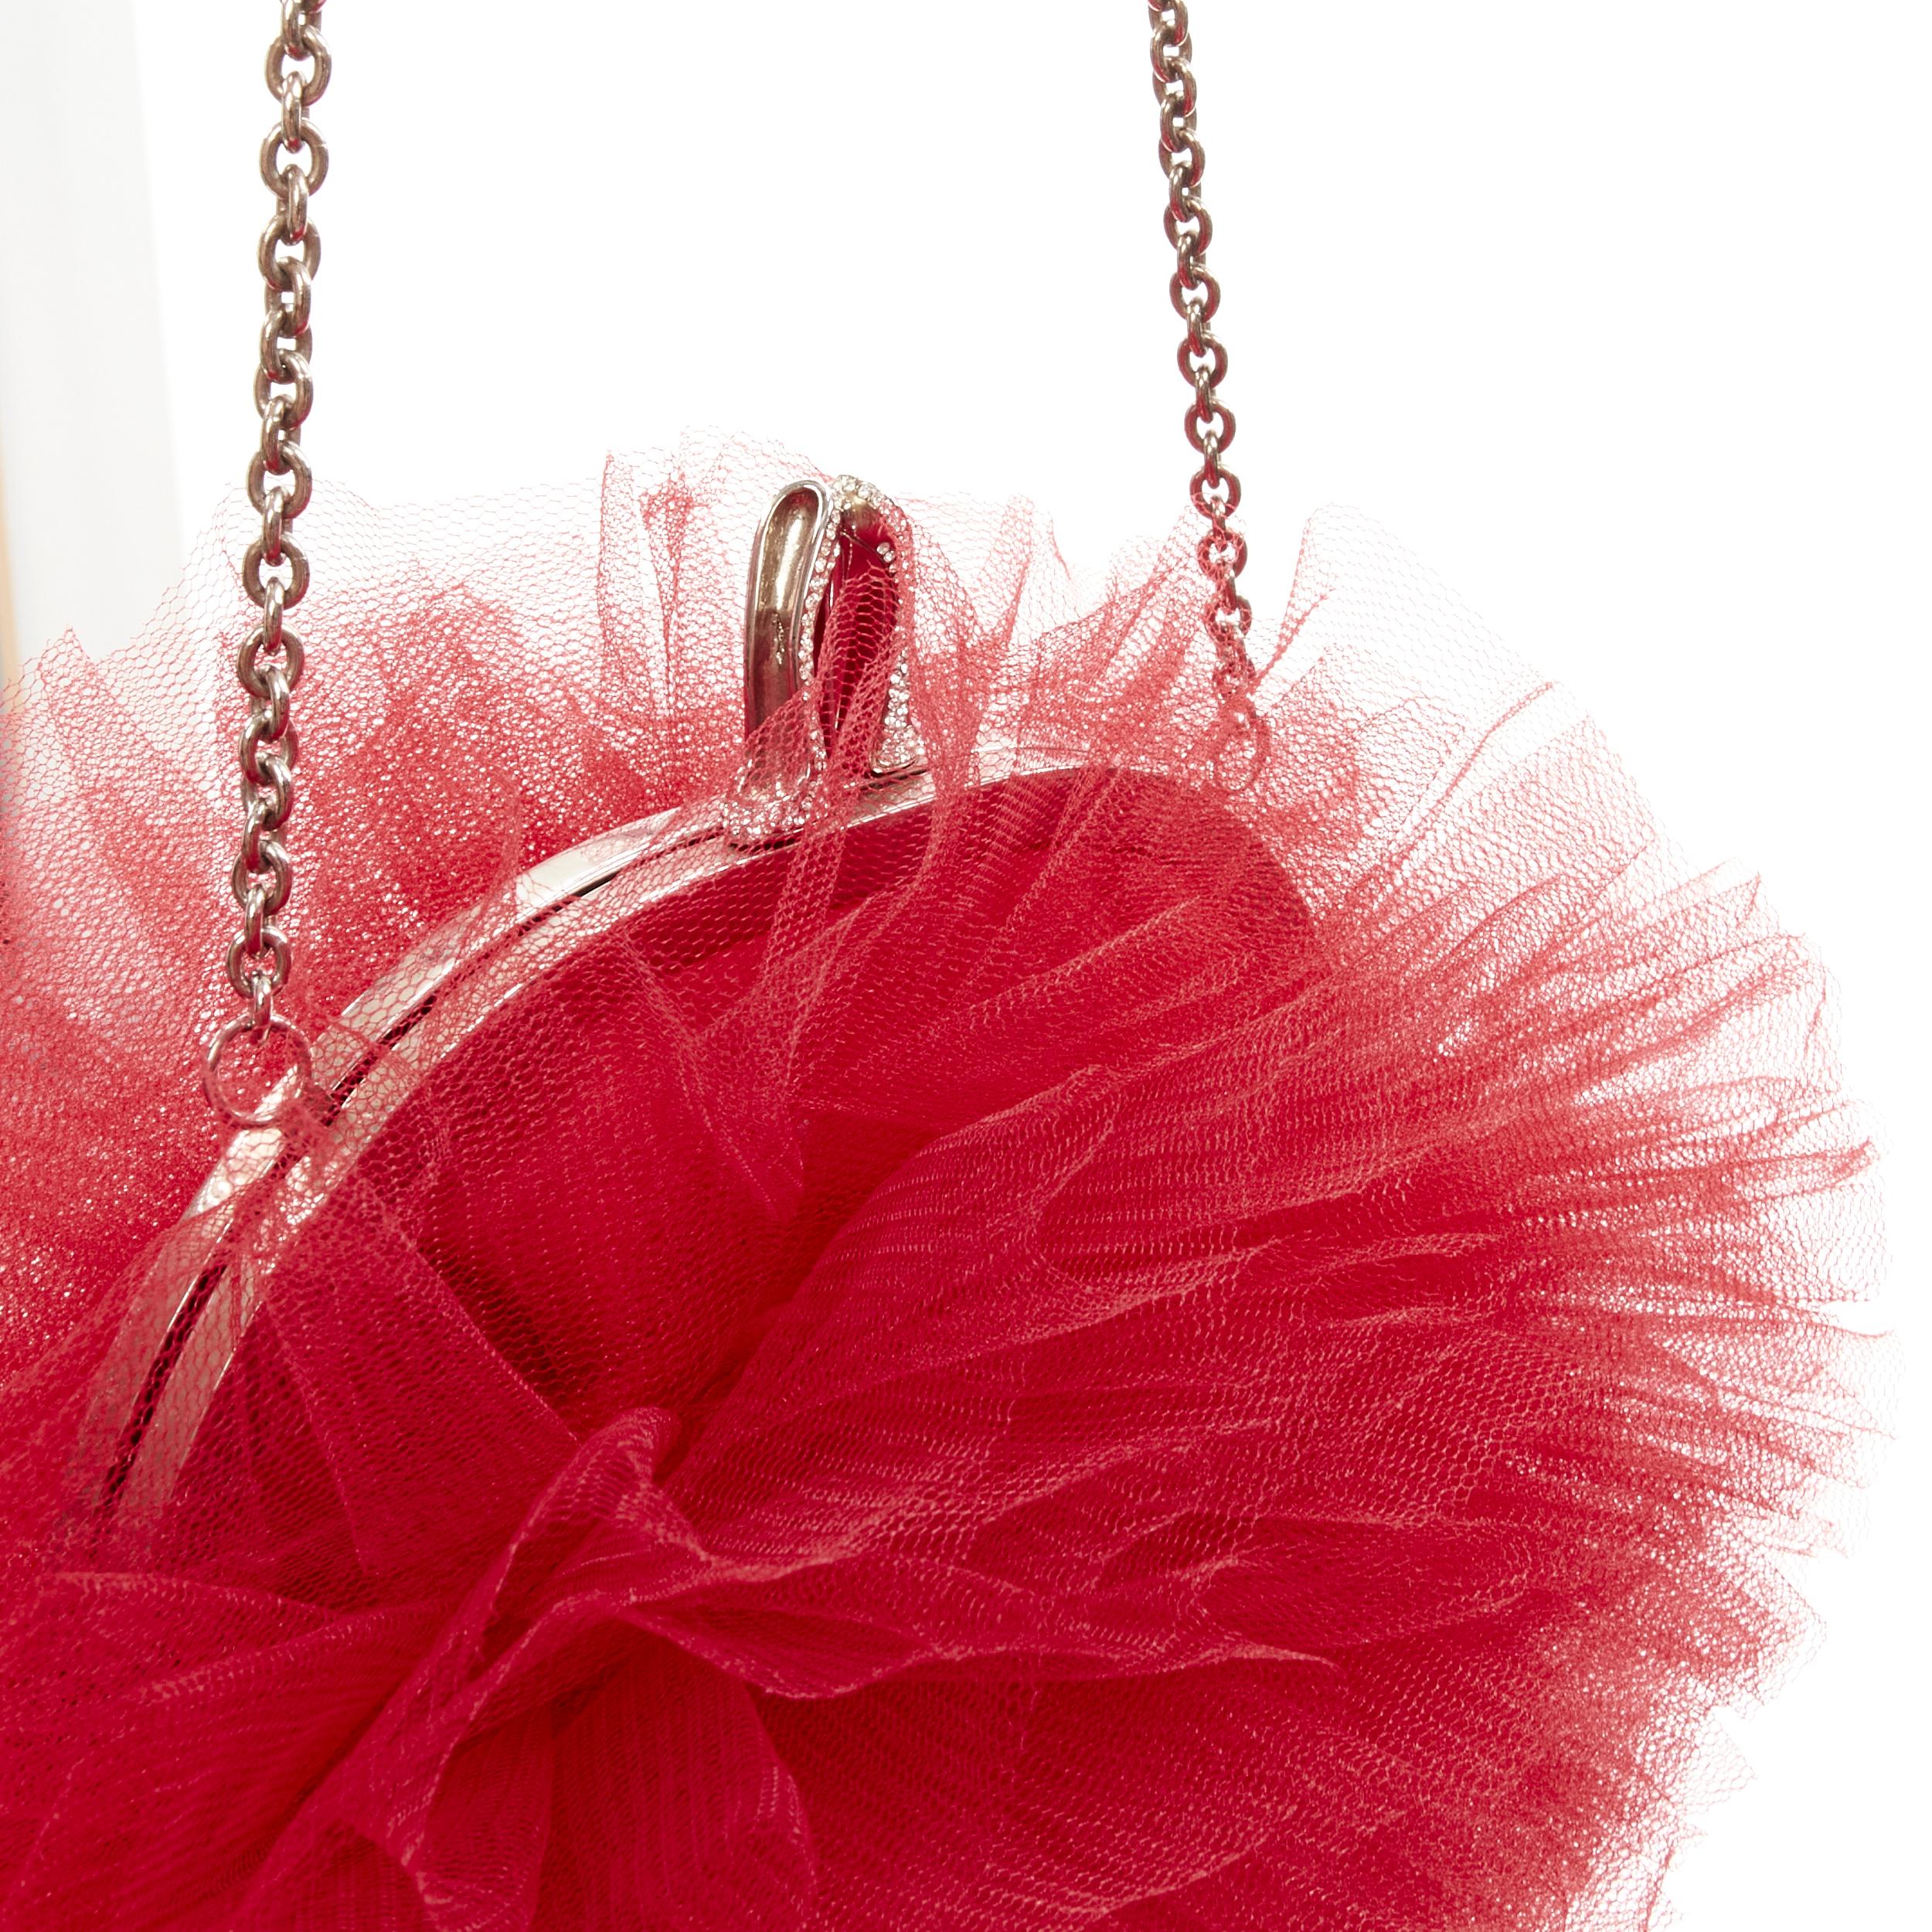 CHRISTIAN LOUBOUTIN Tutulle red tulle strass crystal heel clasp clutch bag For Sale 5